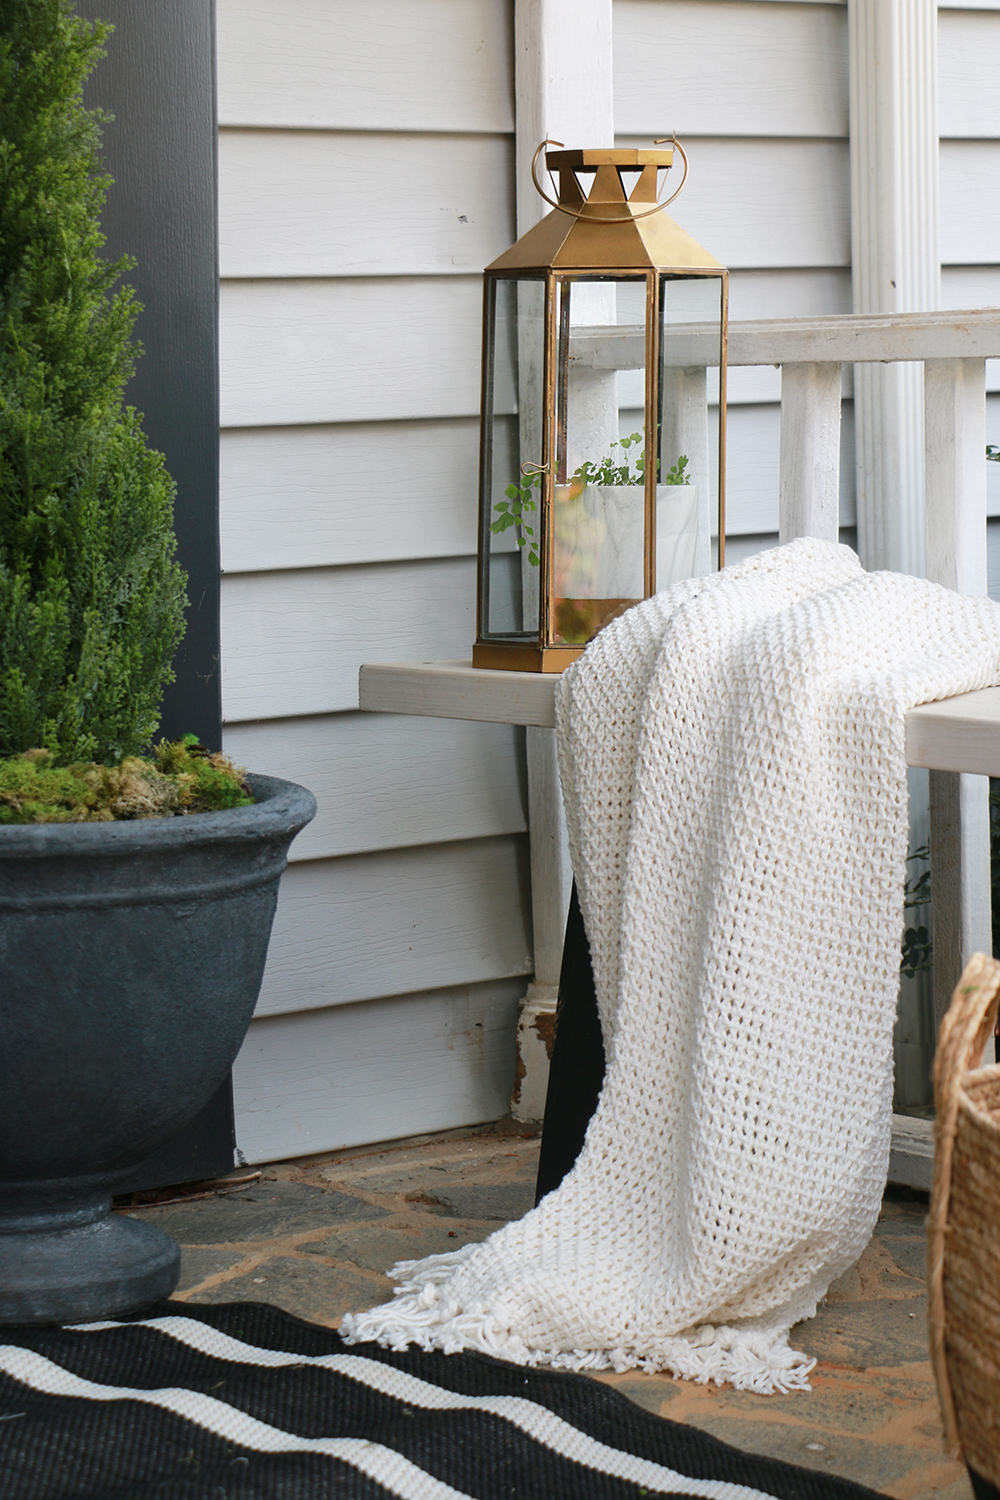 Throw blanket draped on front porch bench